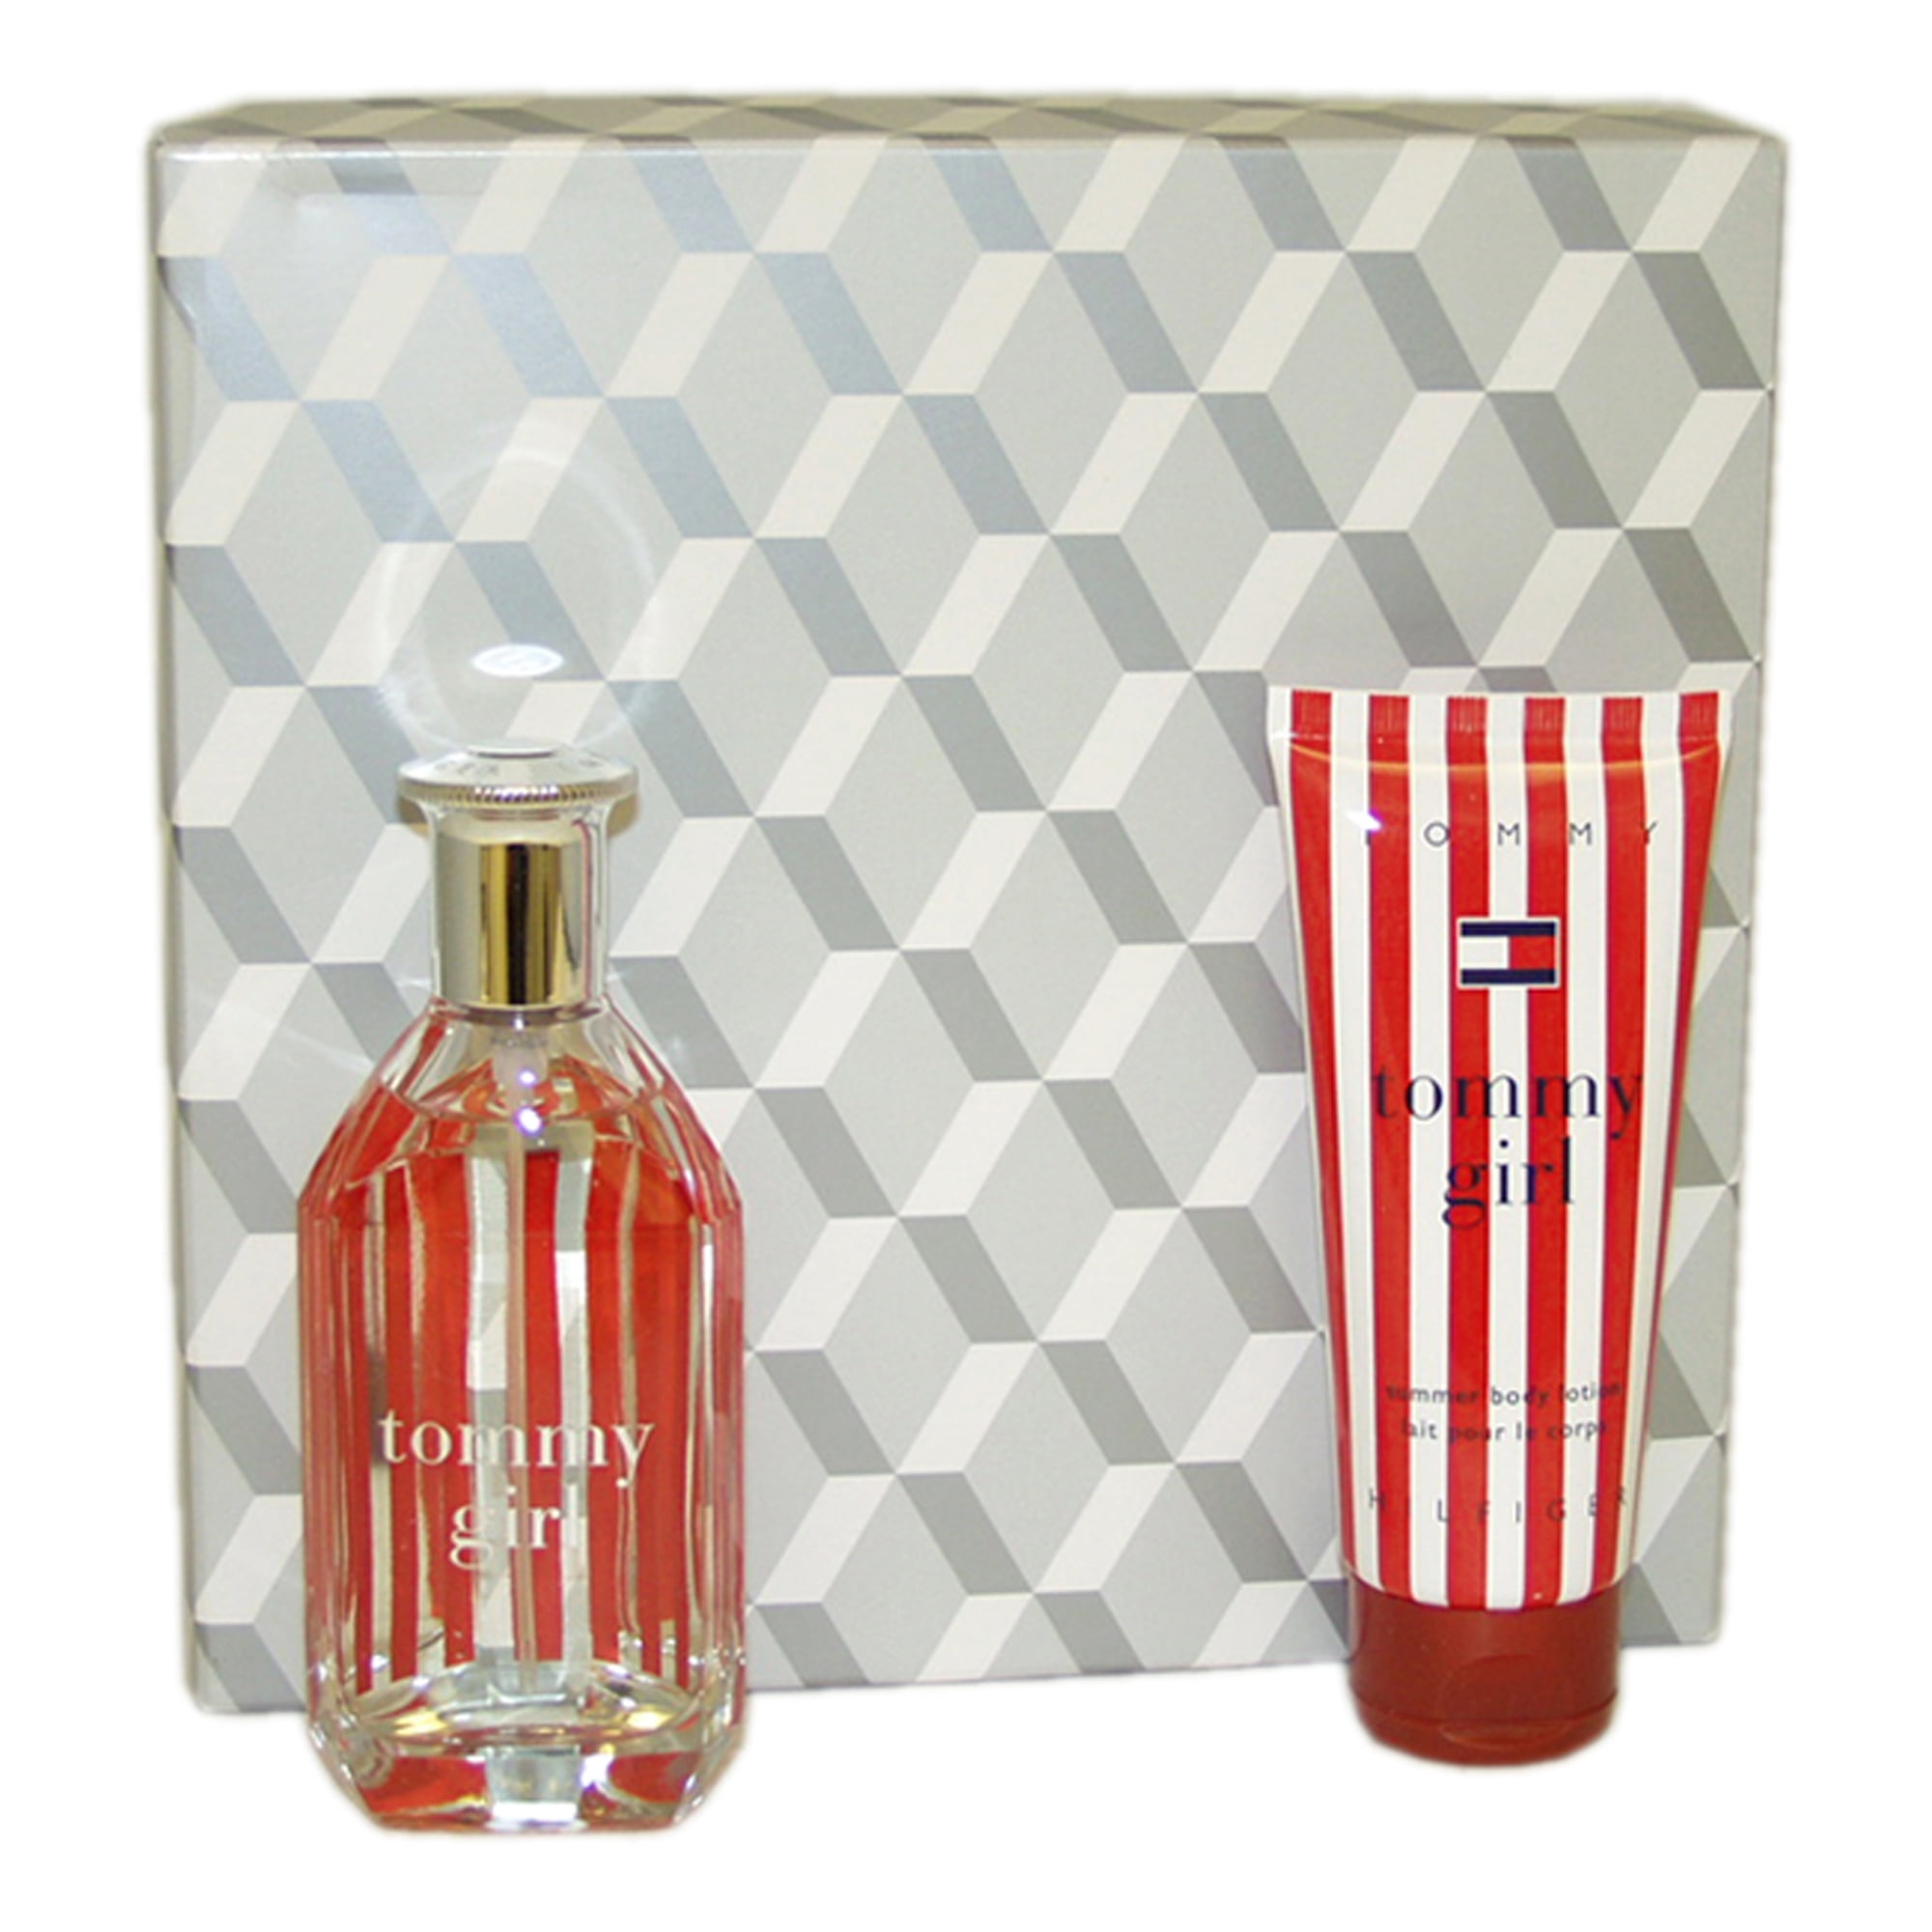 Tommy Girl by Tommy Hilfiger for Women - 2 Pc Gift Set 3.4oz Cologne Spray, 3.4oz Smoothing Body Lot -